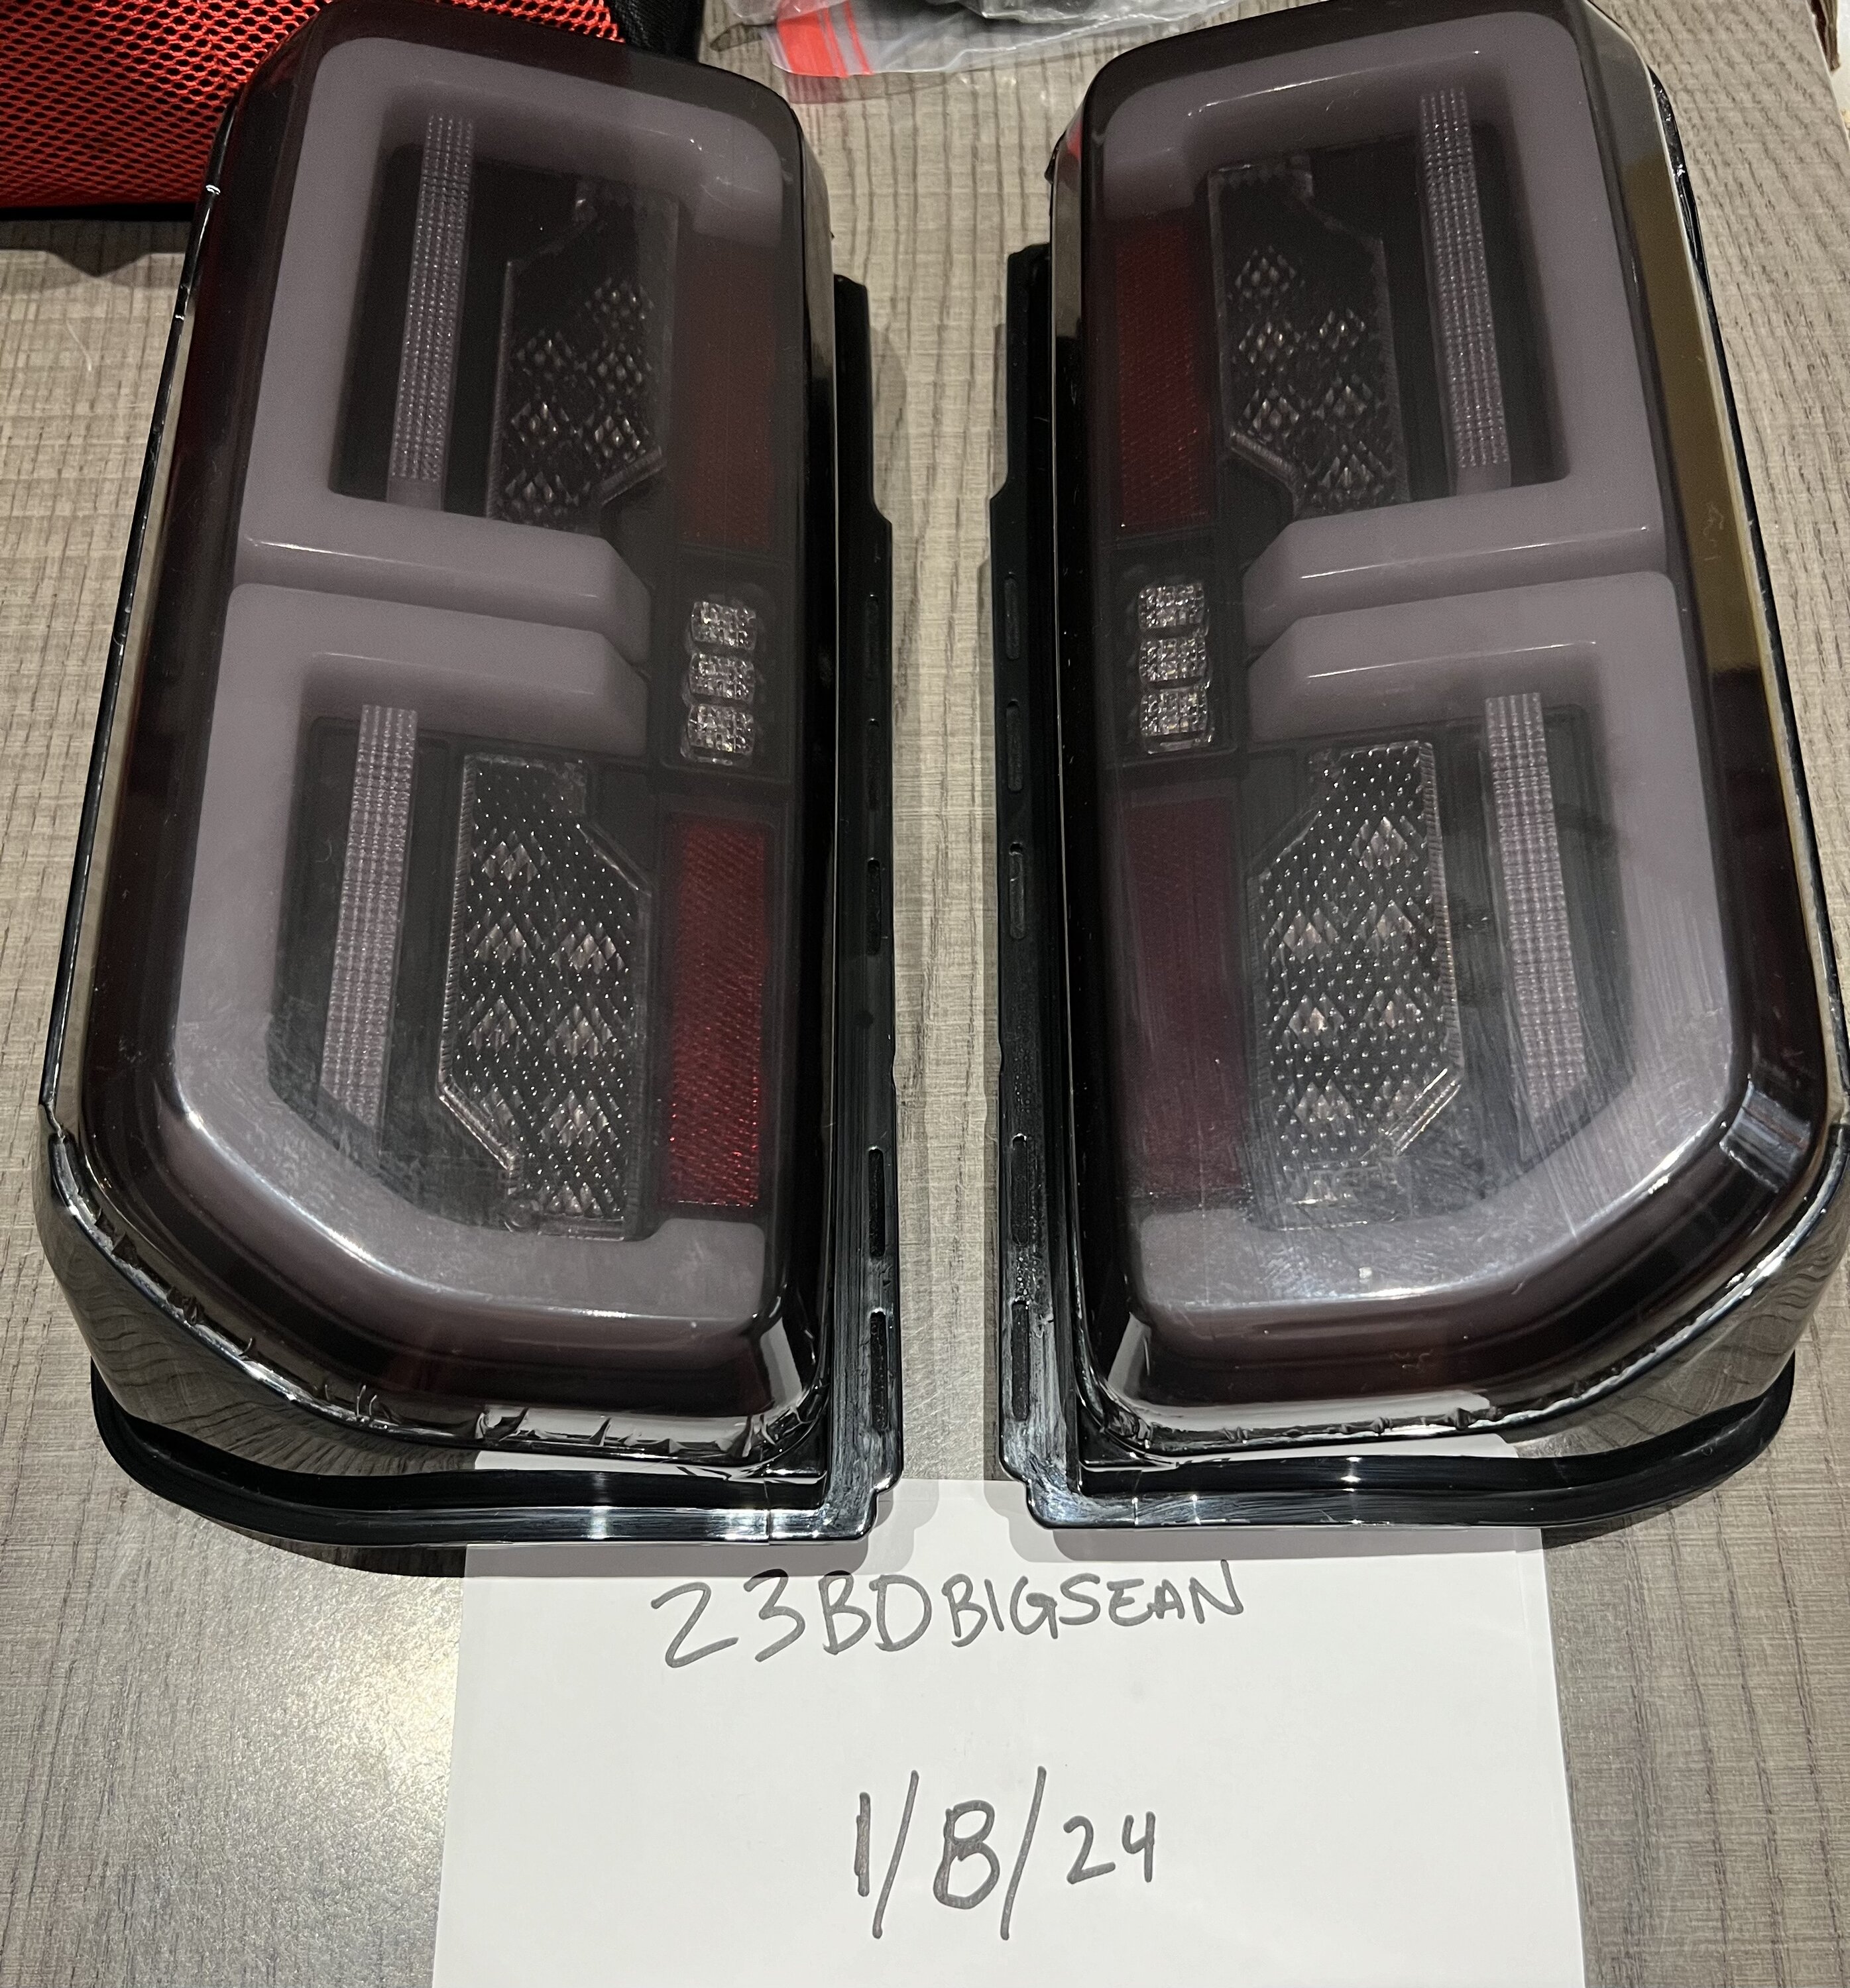 Ford Bronco From Halogen to LED - All taillights replacement options IMG_8966